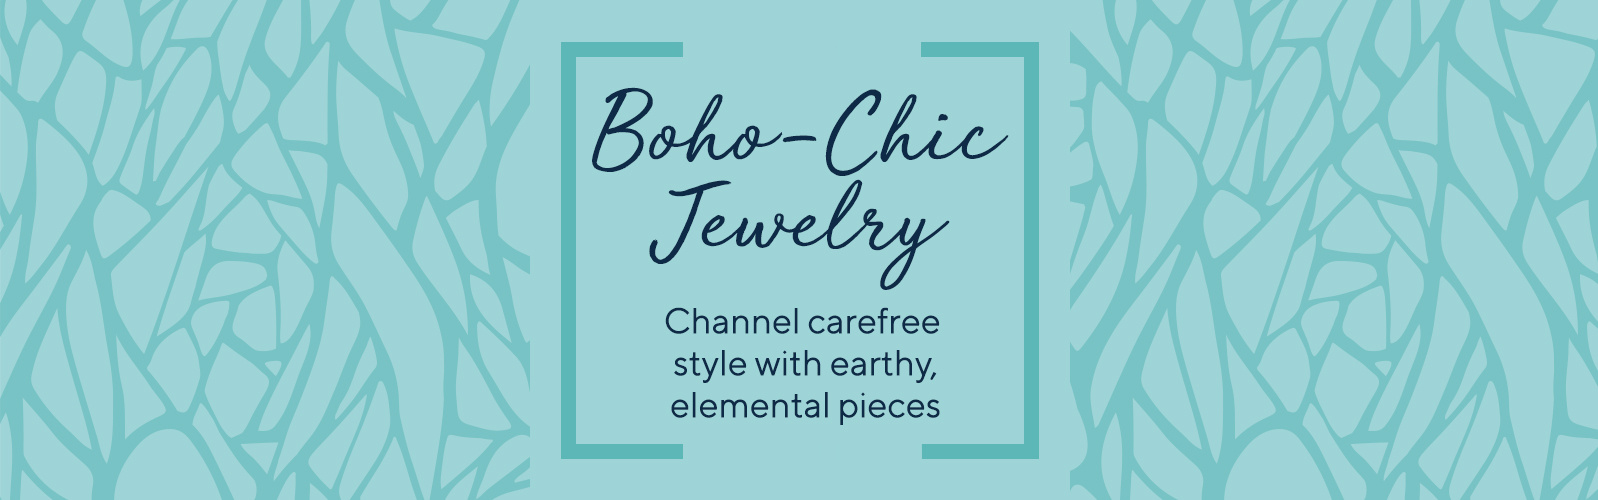 Boho-Chic Jewelry  Channel carefree style with earthy, elemental pieces 